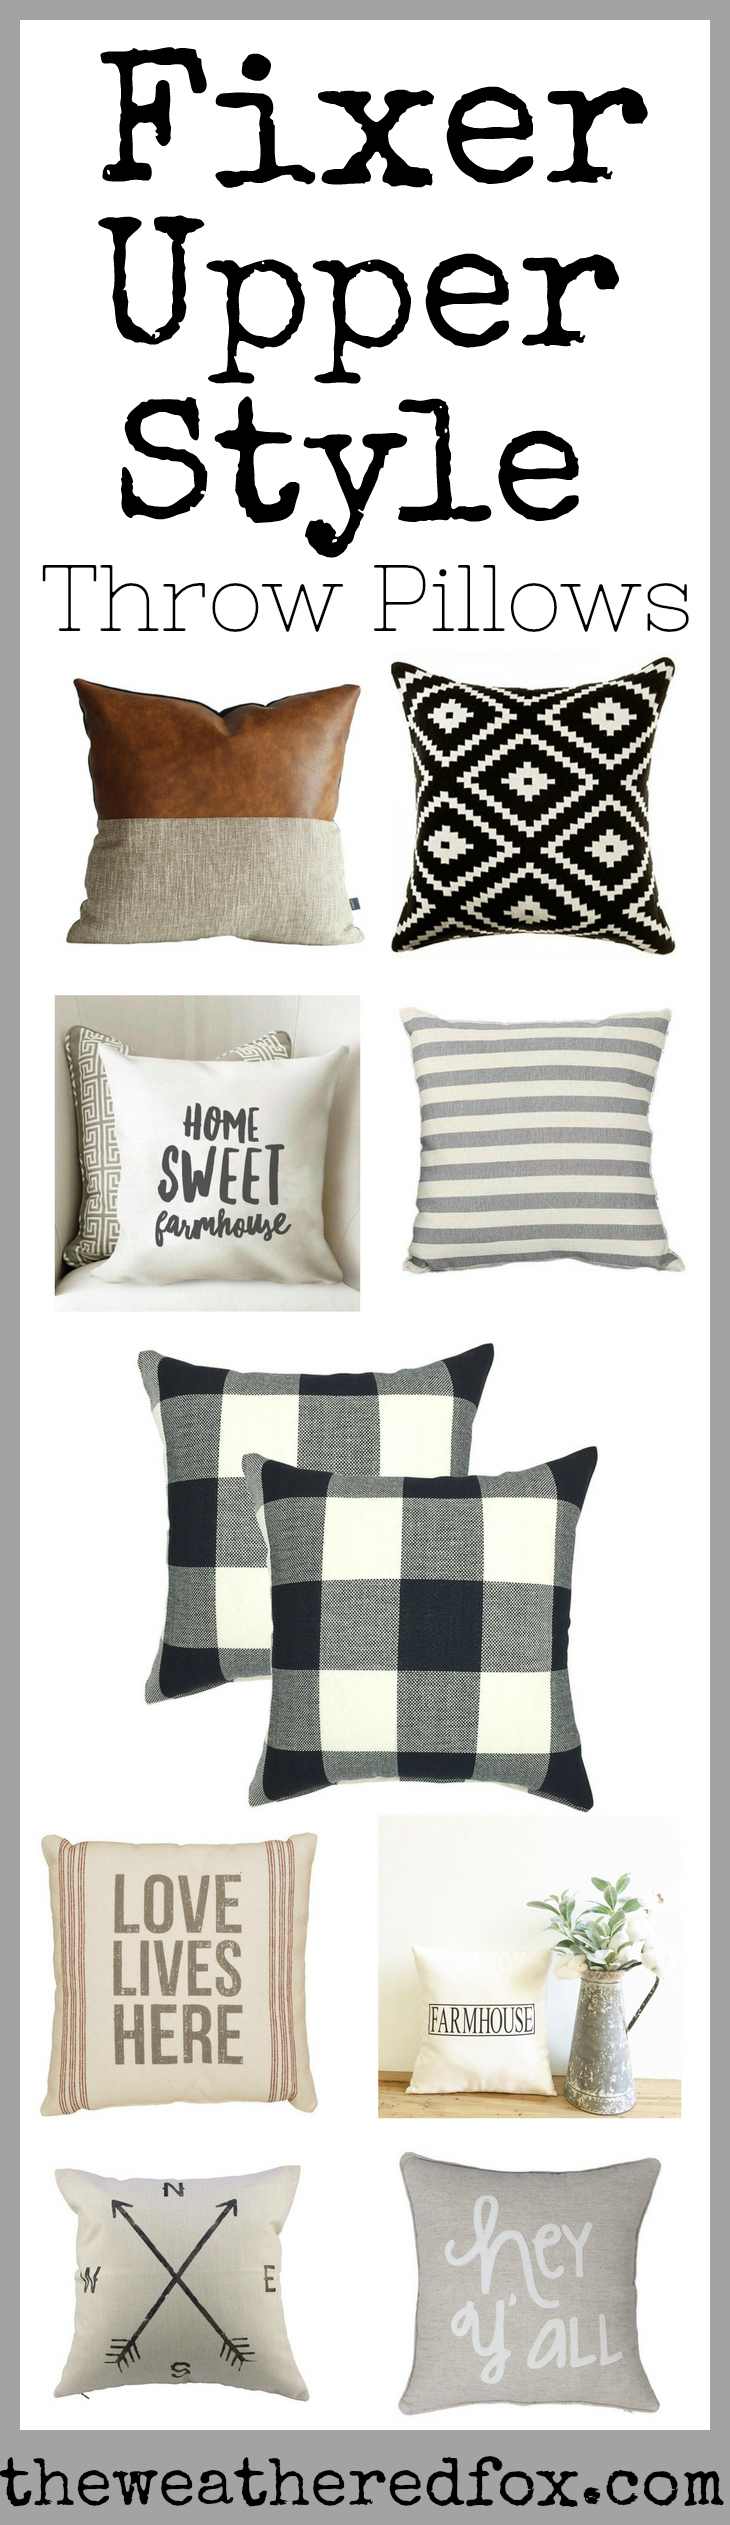 If you’re in love with the Fixer Upper look, then you’ll LOVE these farmhouse throw pillows and pillow covers! Throw pillows are a super easy way to add the farmhouse look to your home decor in an affordable way! Get the Fixer Upper throw pillow look today!